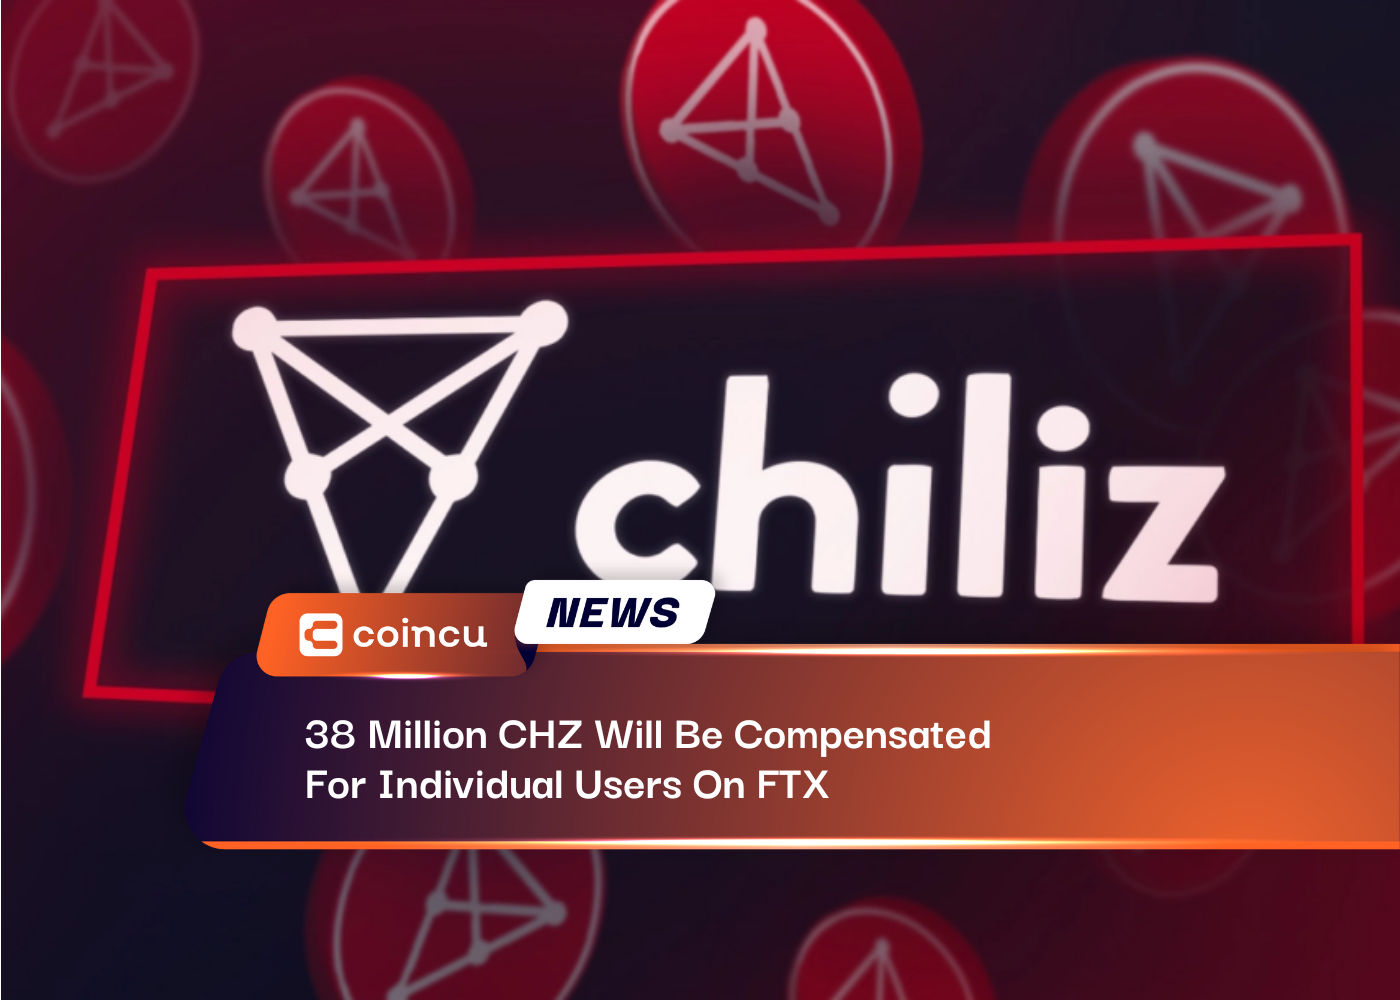 38 Million CHZ Will Be Compensated For Individual Users On FTX